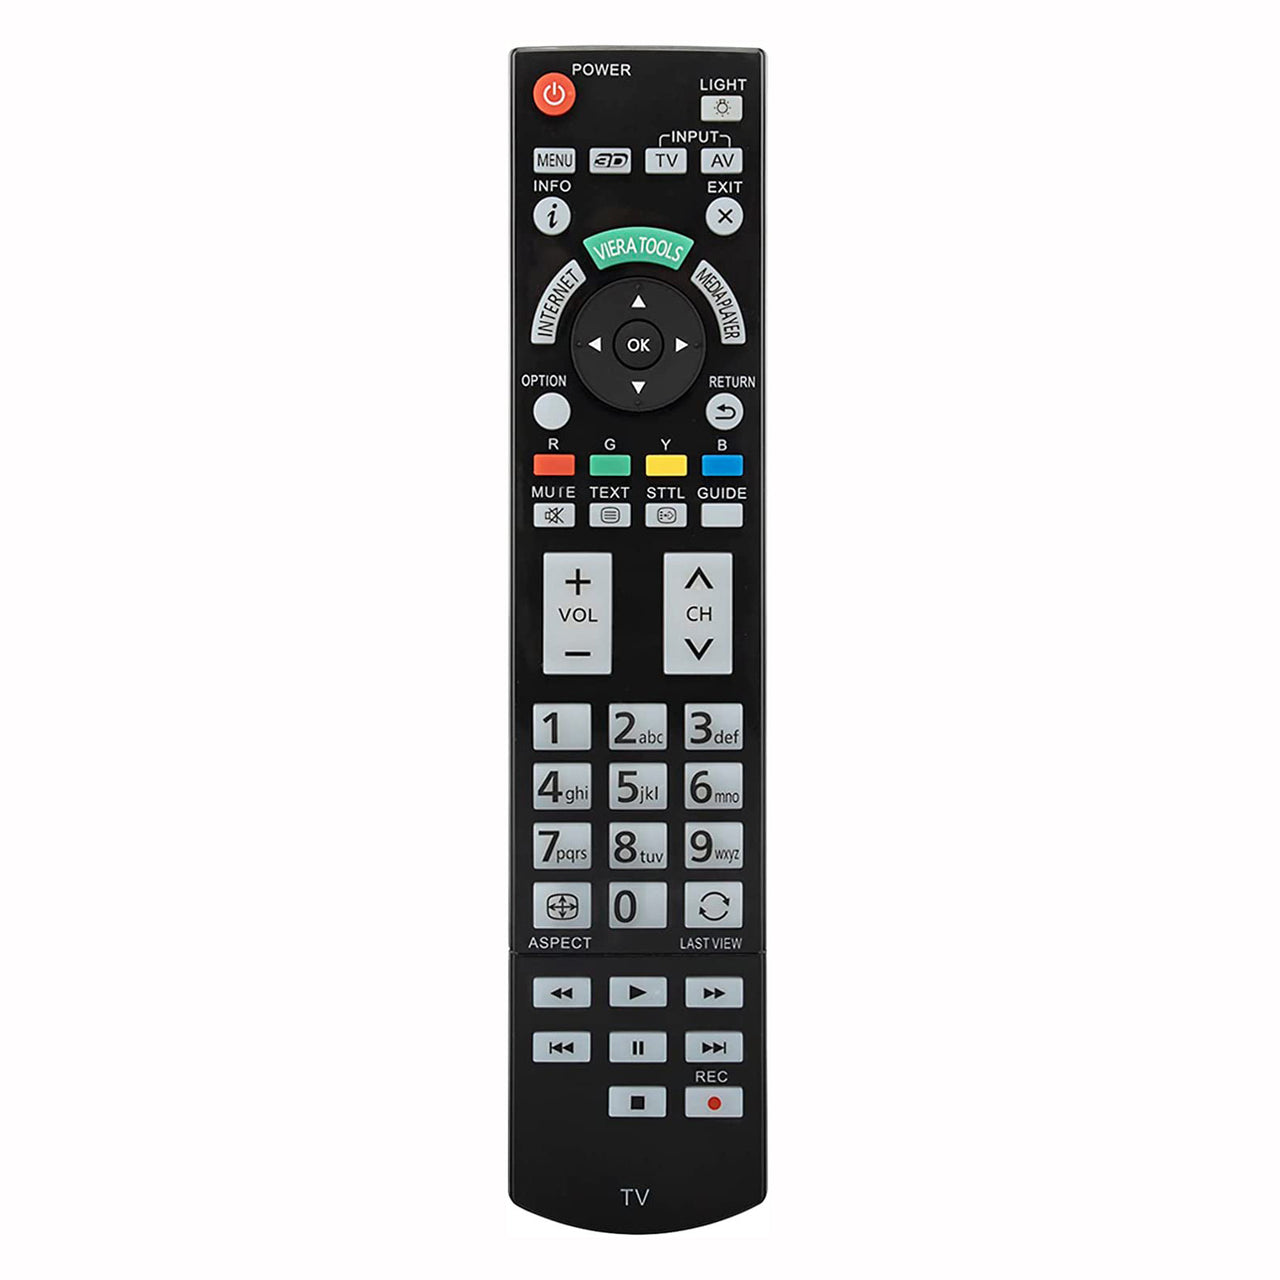 N2QAYB000746 Replacement Remote for Panasonic TV THL47WT50A THL55DT50A THL55WT50A